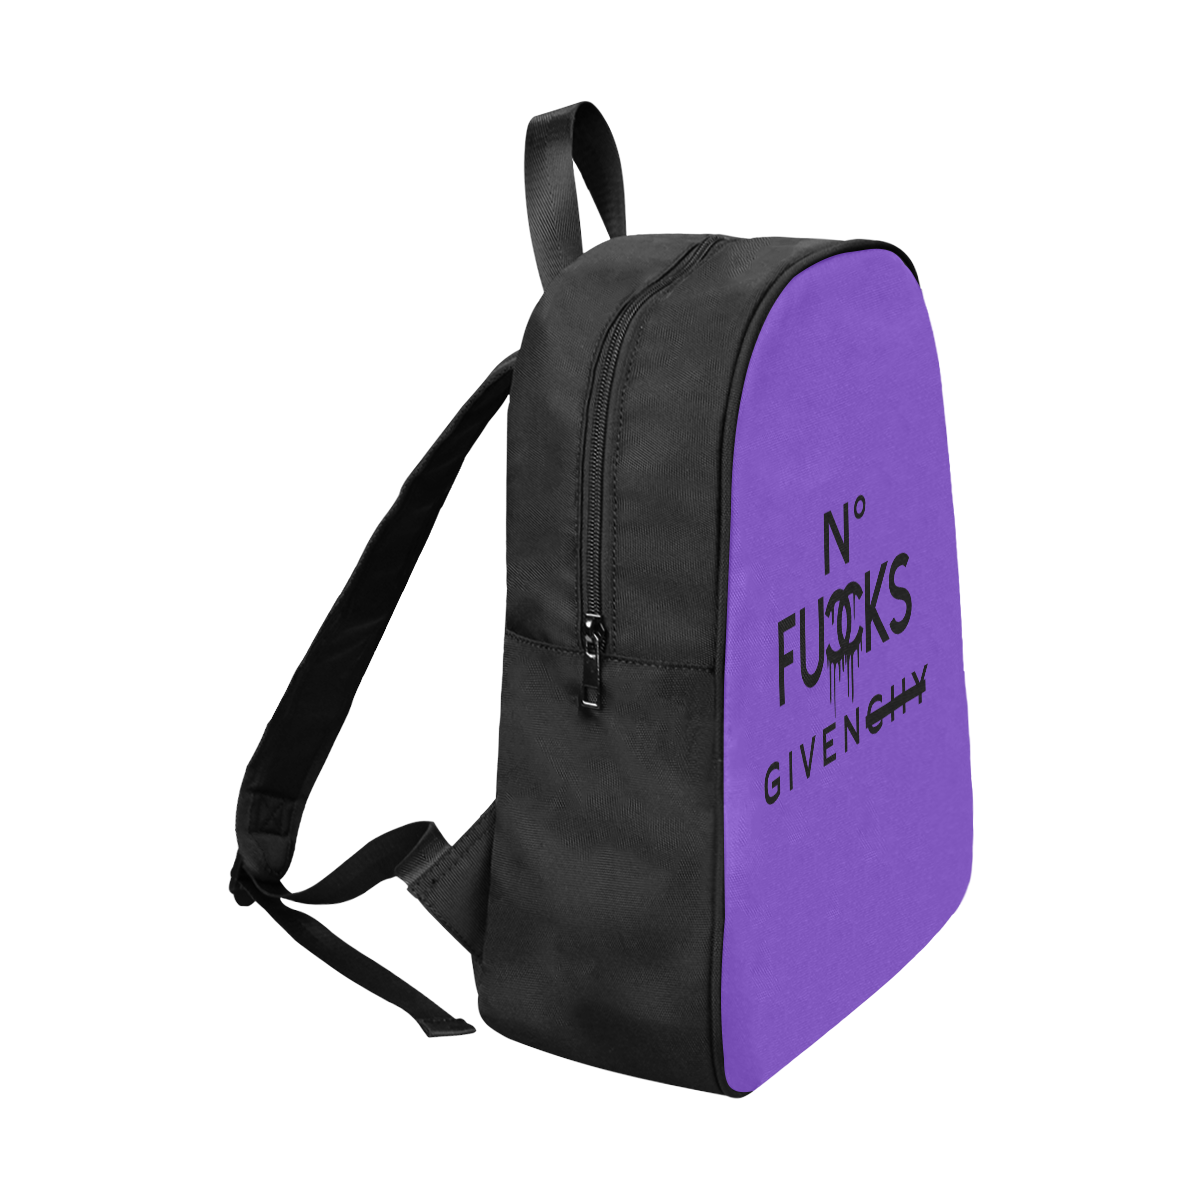 No F Given Purple Fabric School Backpack (Model 1682) (Large)